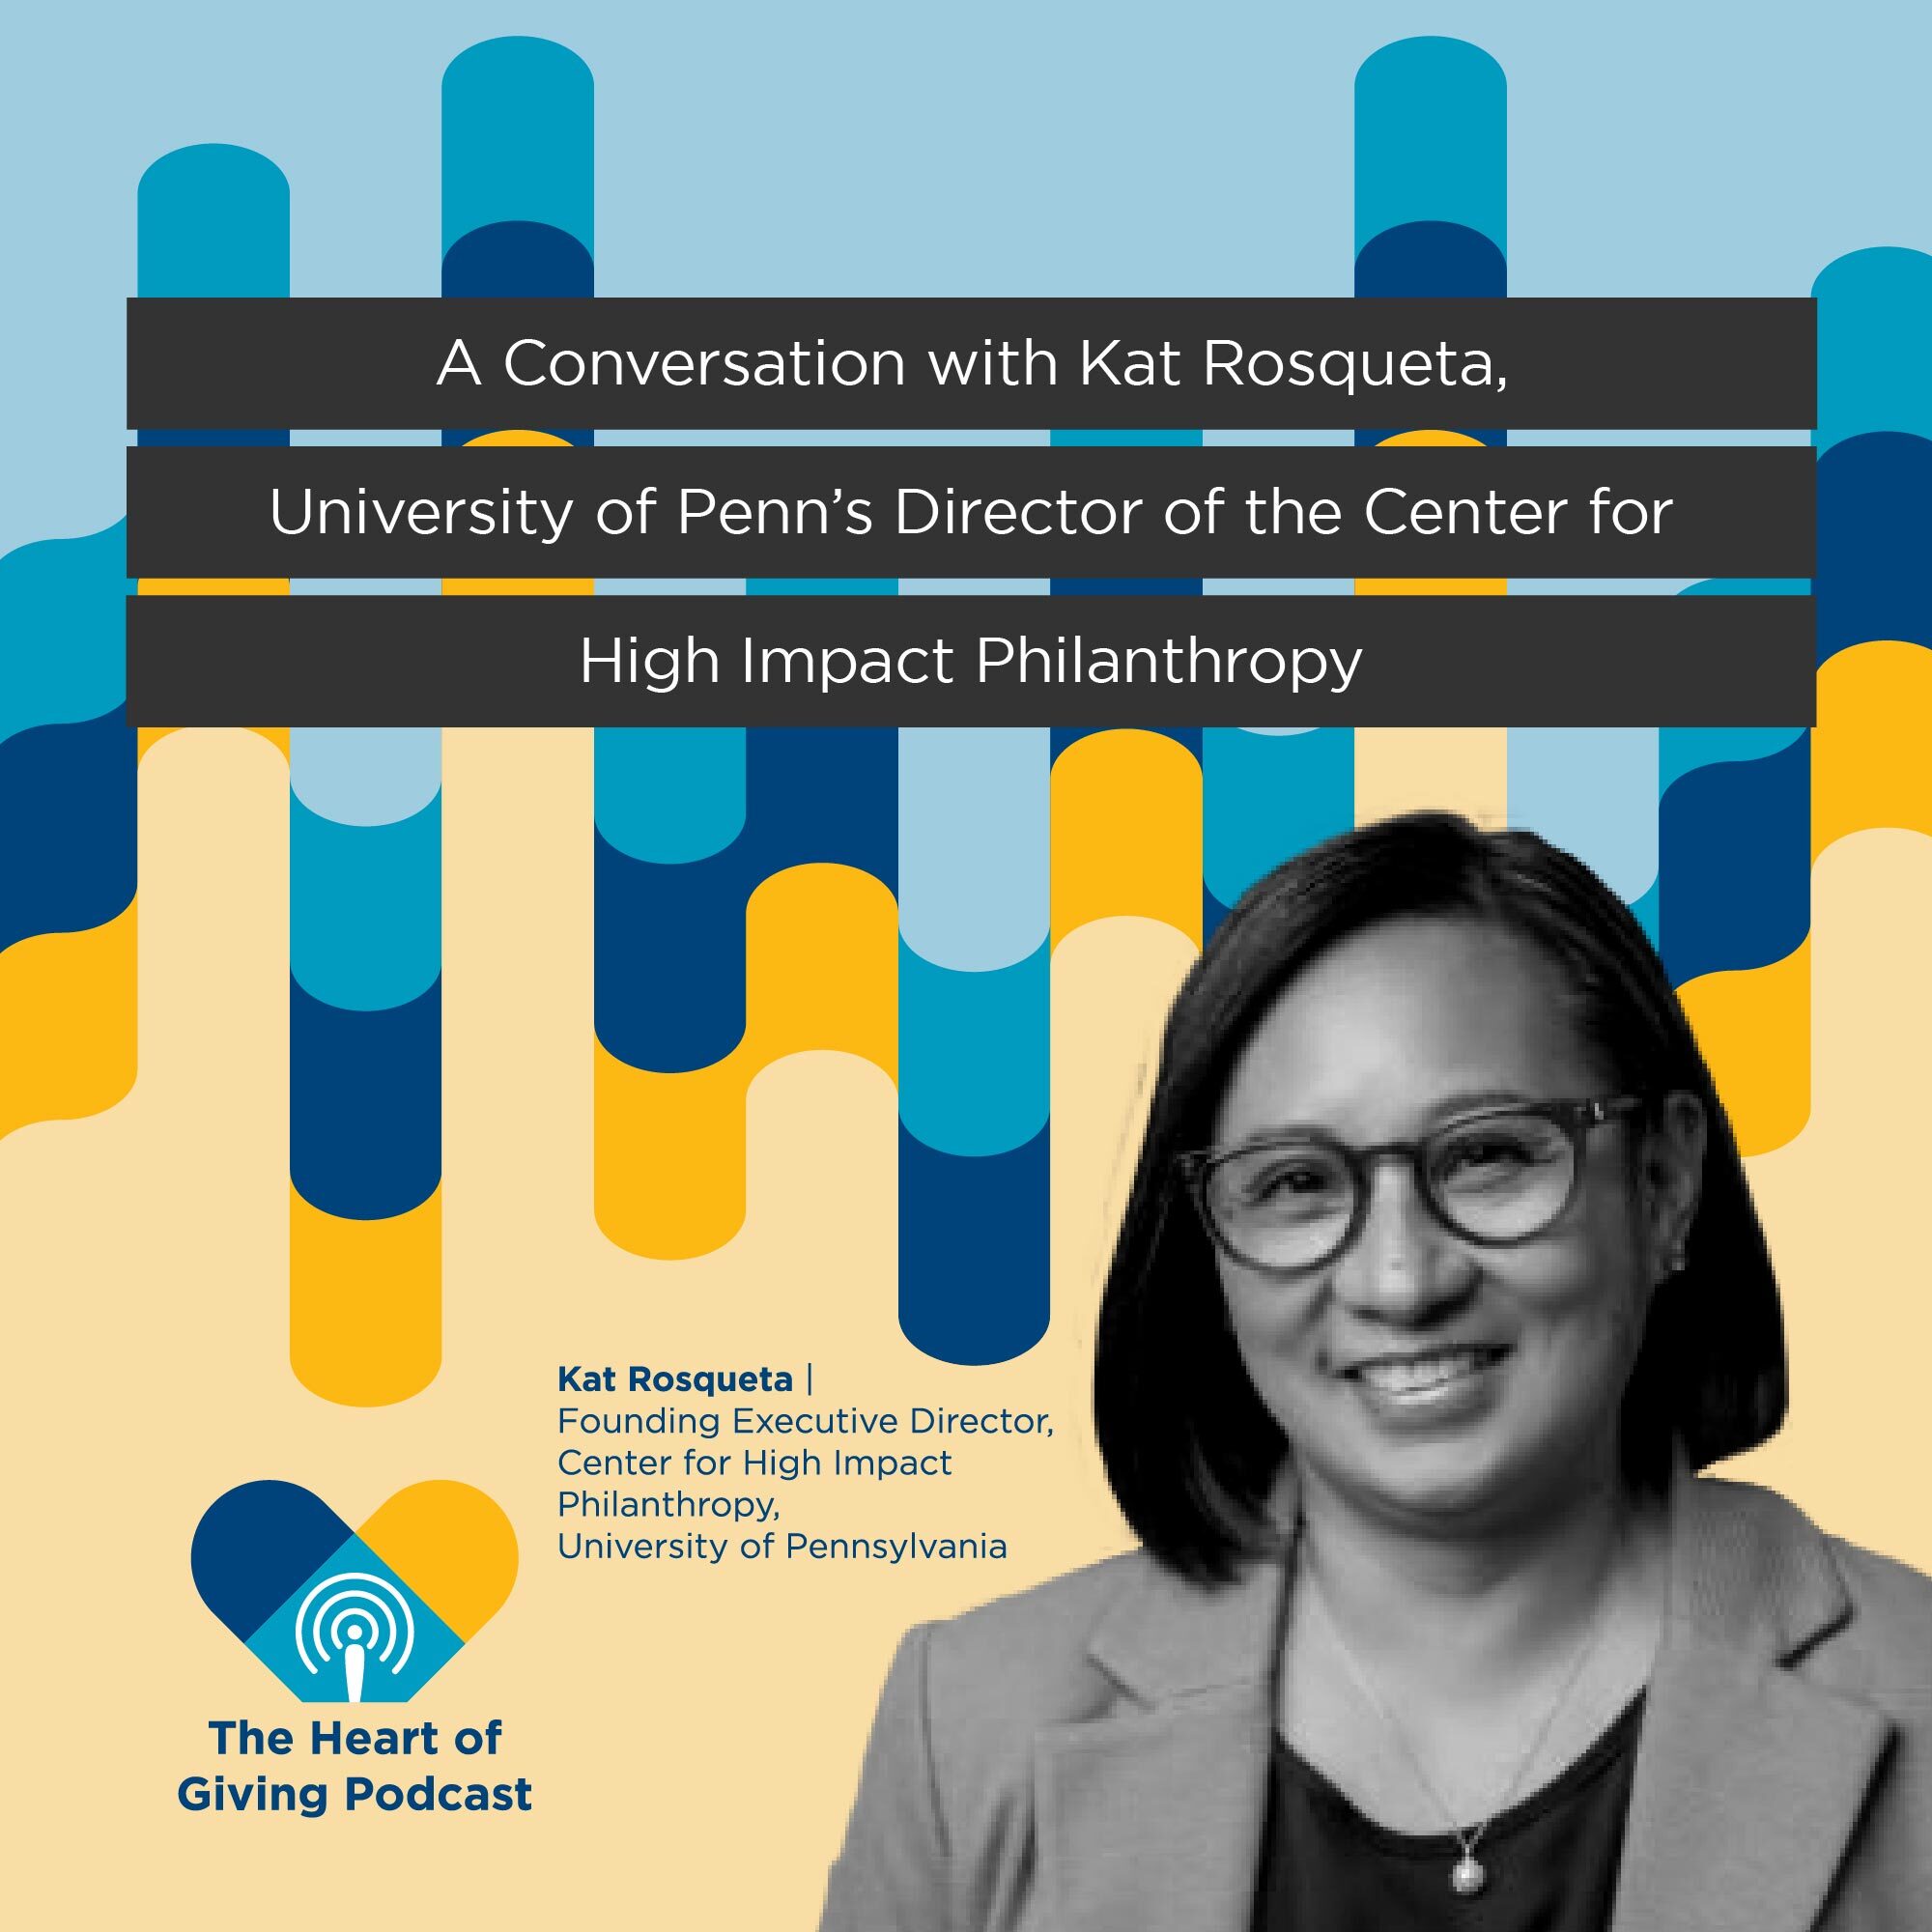 A conversation with Kat Rosqueta, University of Penn's Director of the Center for High Impact Philanthropy